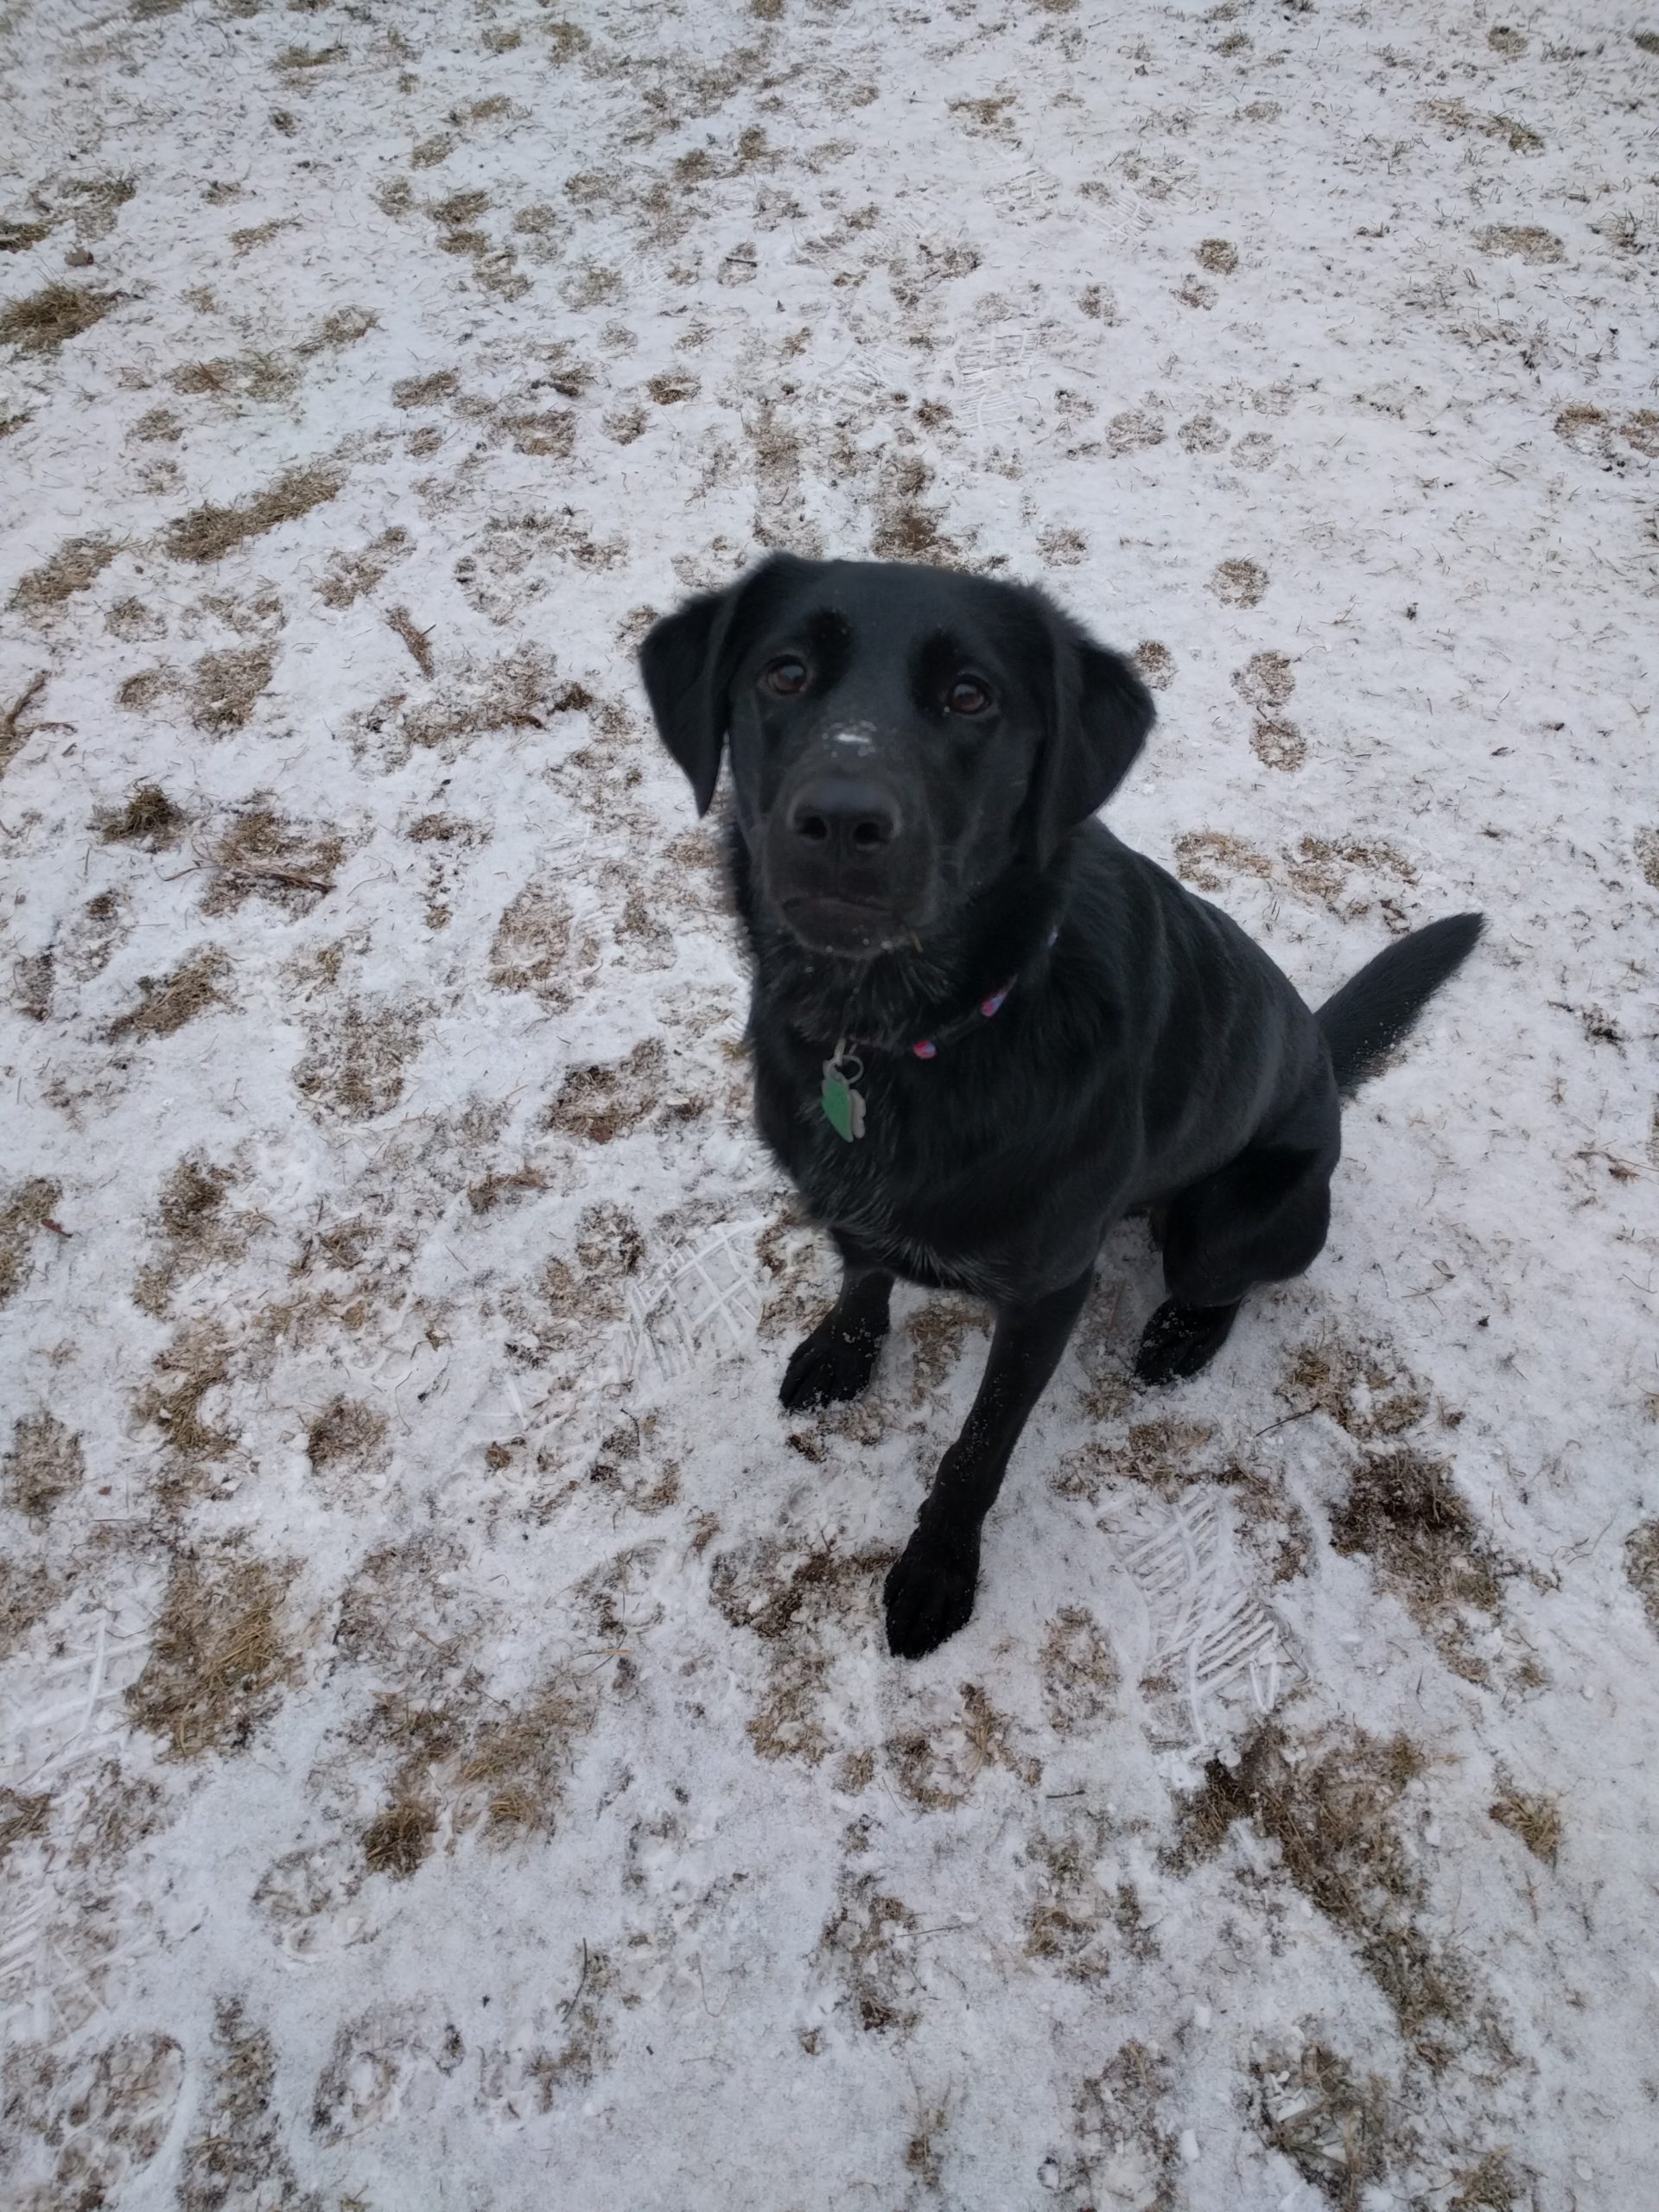 Black, floppy eared dog named Loki standing in a dusting of snow.